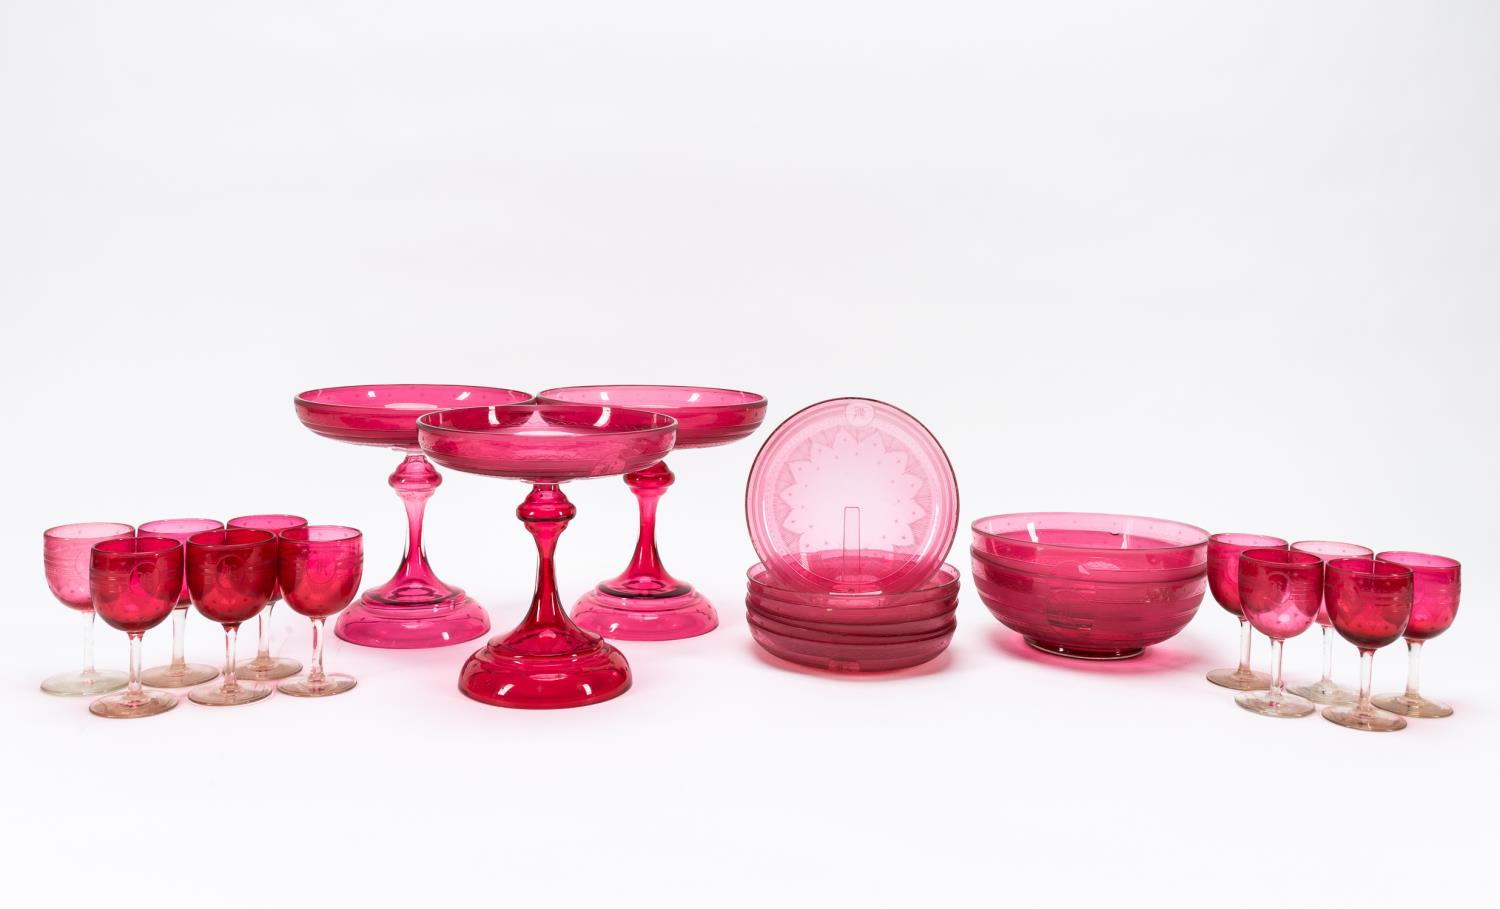 MONOGRAMMED CRANBERRY GLASS TABLEWARE,